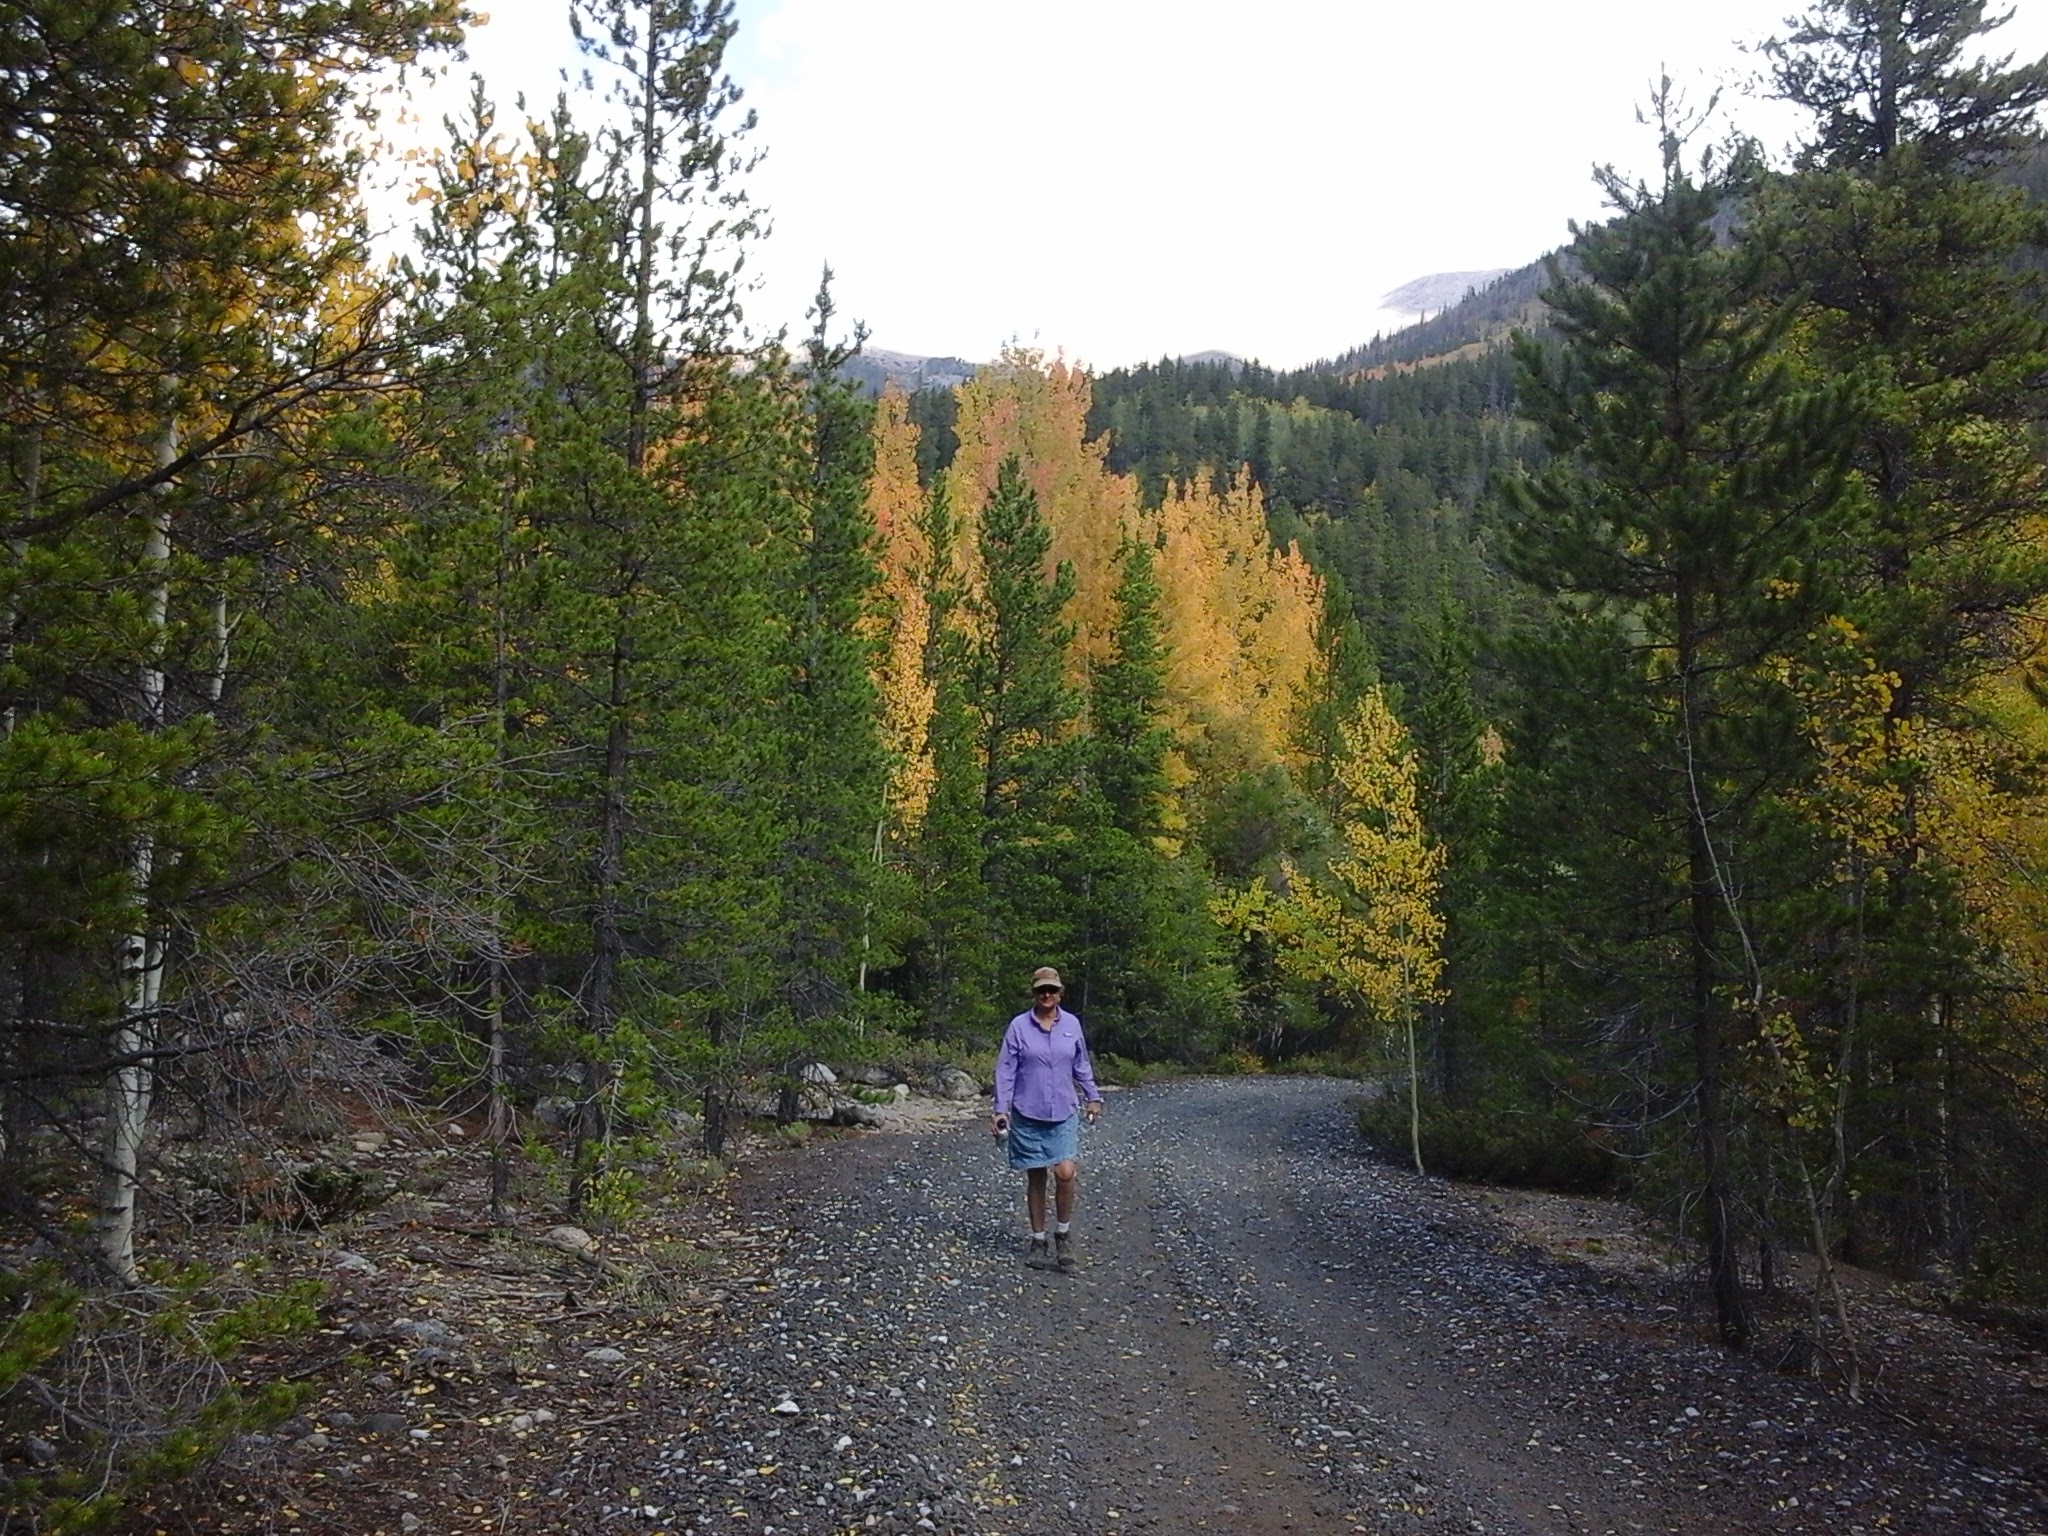 Lady walking along a road with fall colors starting on the aspen trees.